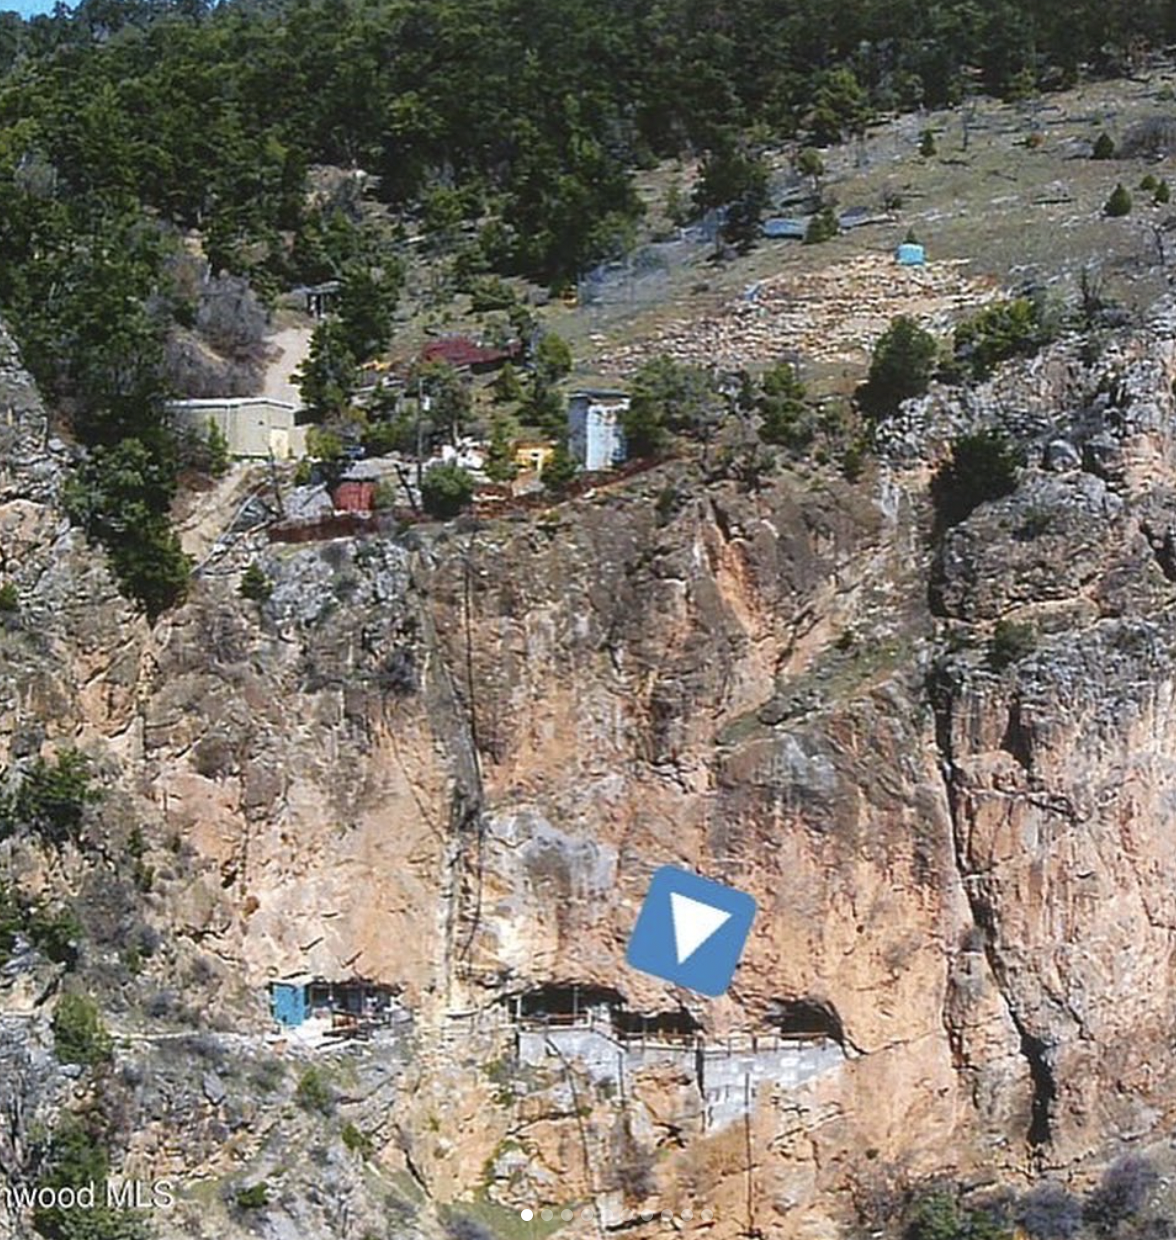 cursed zillow photo - cave house glenwood springs - wood Mls